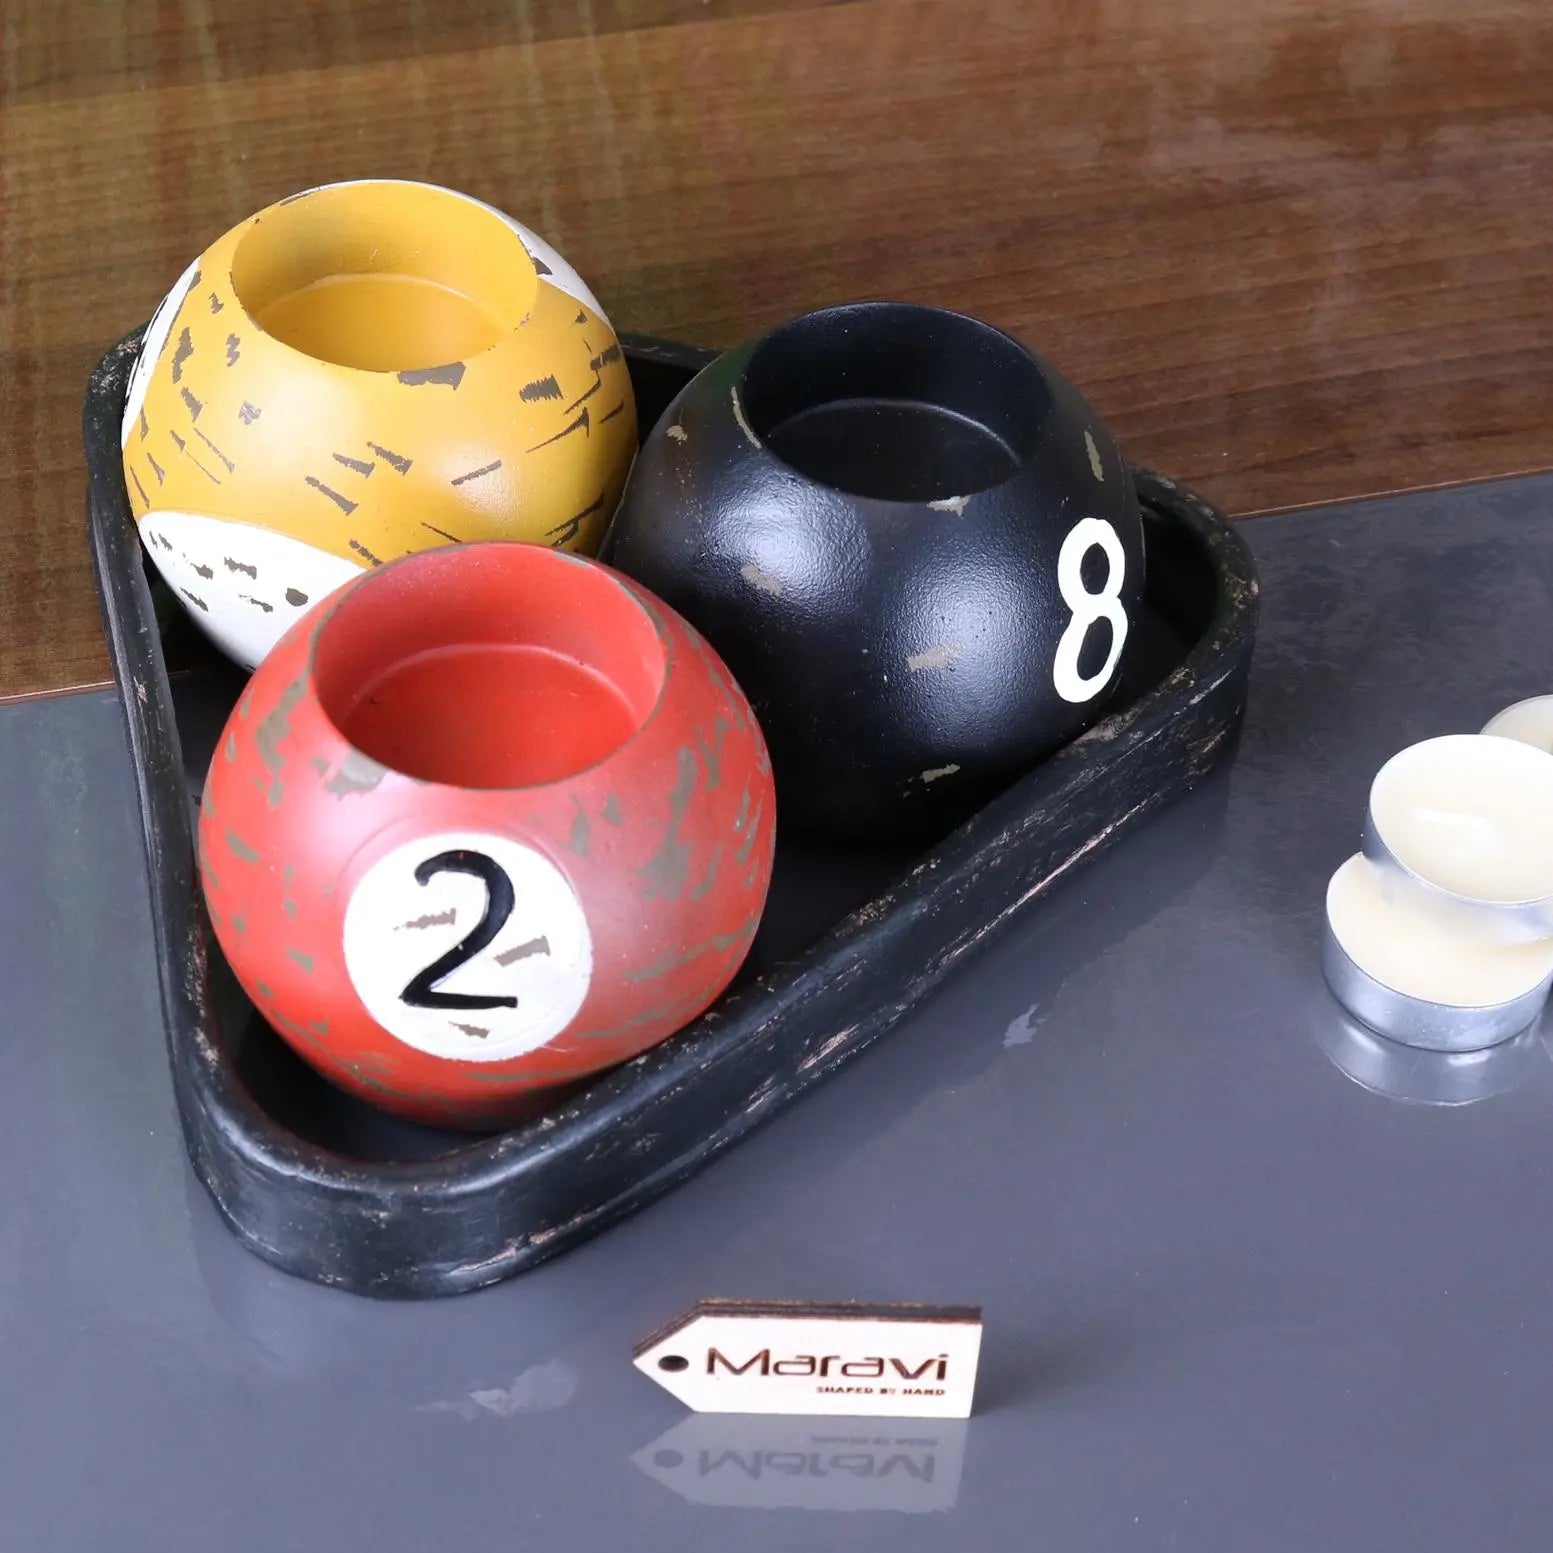 Ingali Pool Ball Candle Holders Top View